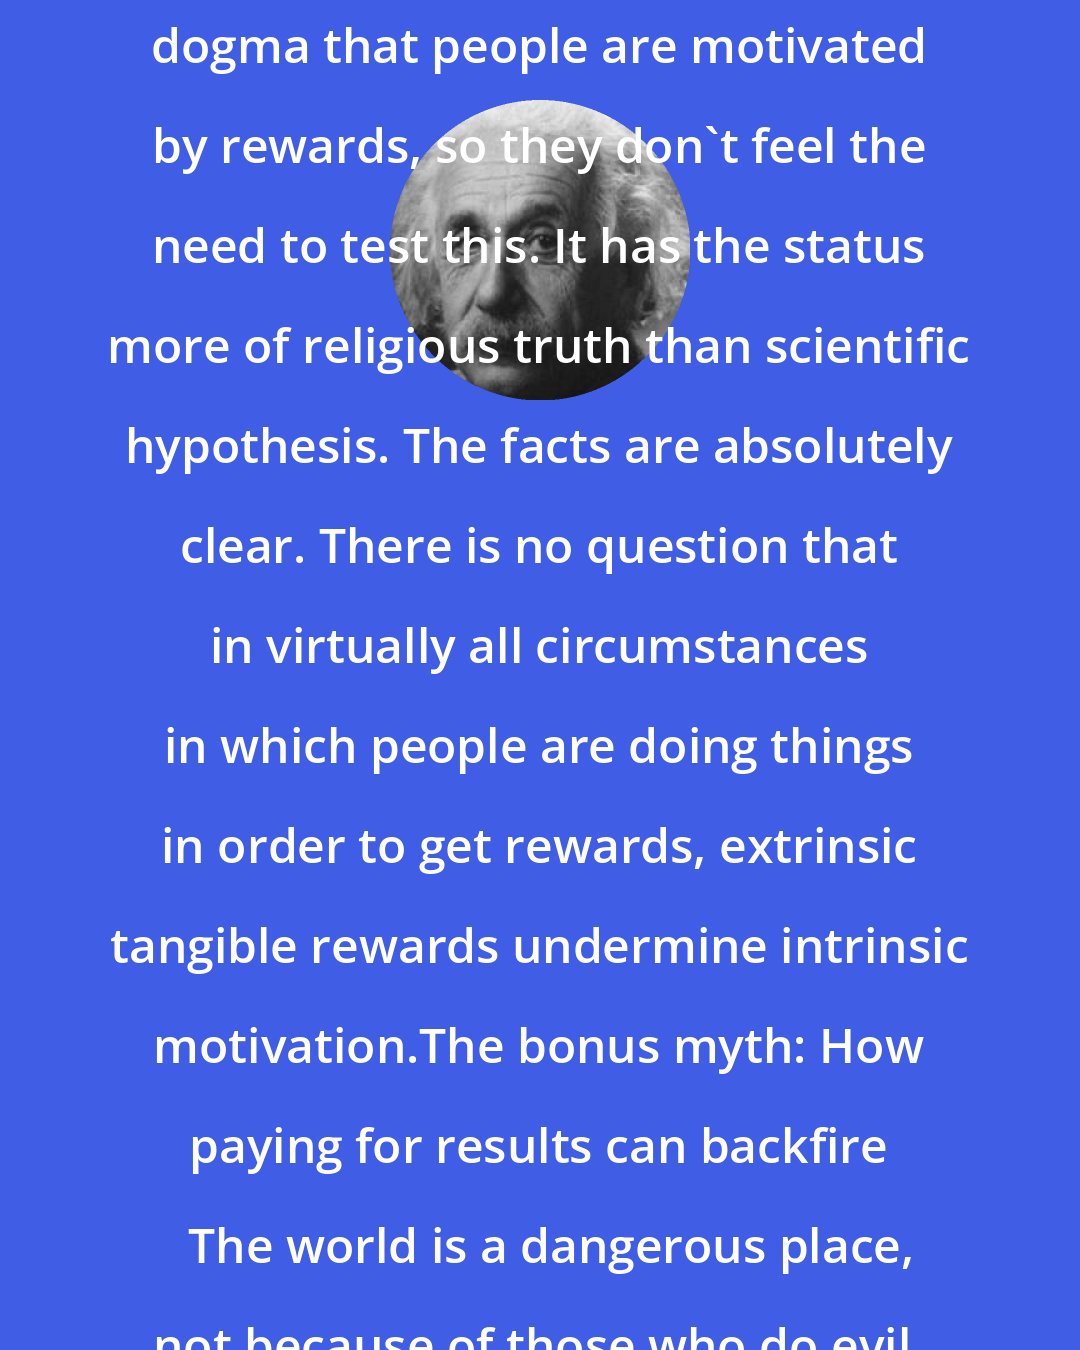 Albert Einstein: Economists and workplace consultants regard it as almost unquestioned dogma that people are motivated by rewards, so they don't feel the need to test this. It has the status more of religious truth than scientific hypothesis. The facts are absolutely clear. There is no question that in virtually all circumstances in which people are doing things in order to get rewards, extrinsic tangible rewards undermine intrinsic motivation.The bonus myth: How paying for results can backfire   The world is a dangerous place, not because of those who do evil, but because of those who look on and do nothing.